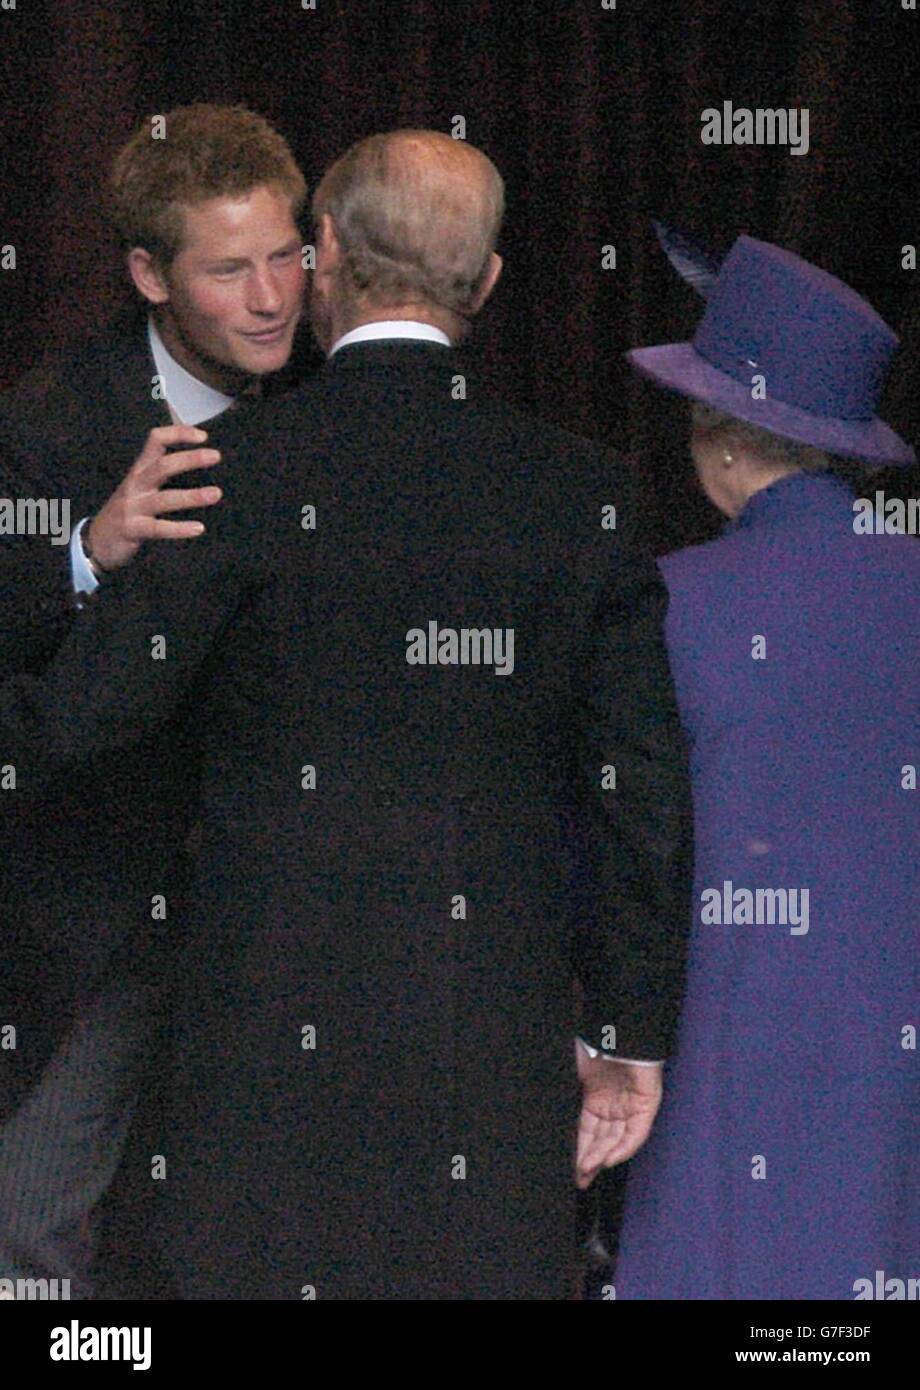 Prince Harry (left) greets his grandparents, the Queen and the Duke of Edinburgh at the wedding of Lady Tamara Grosvenor to Edward van Cutsem at Chester Cathedral. Prince William will act as usher at the lavish service attended by 650 guests, including the Queen and the Duke of Edinburgh. The wedding brings together two of Britain's wealthiest families. Lady Tamara Grosvenor, 24, is the eldest daughter of the Duke of Westminster, Britain's richest man, whose land holdings, including swathes of Mayfair and Belgravia, give him a personal fortune estimated at 4 billion. Stock Photo